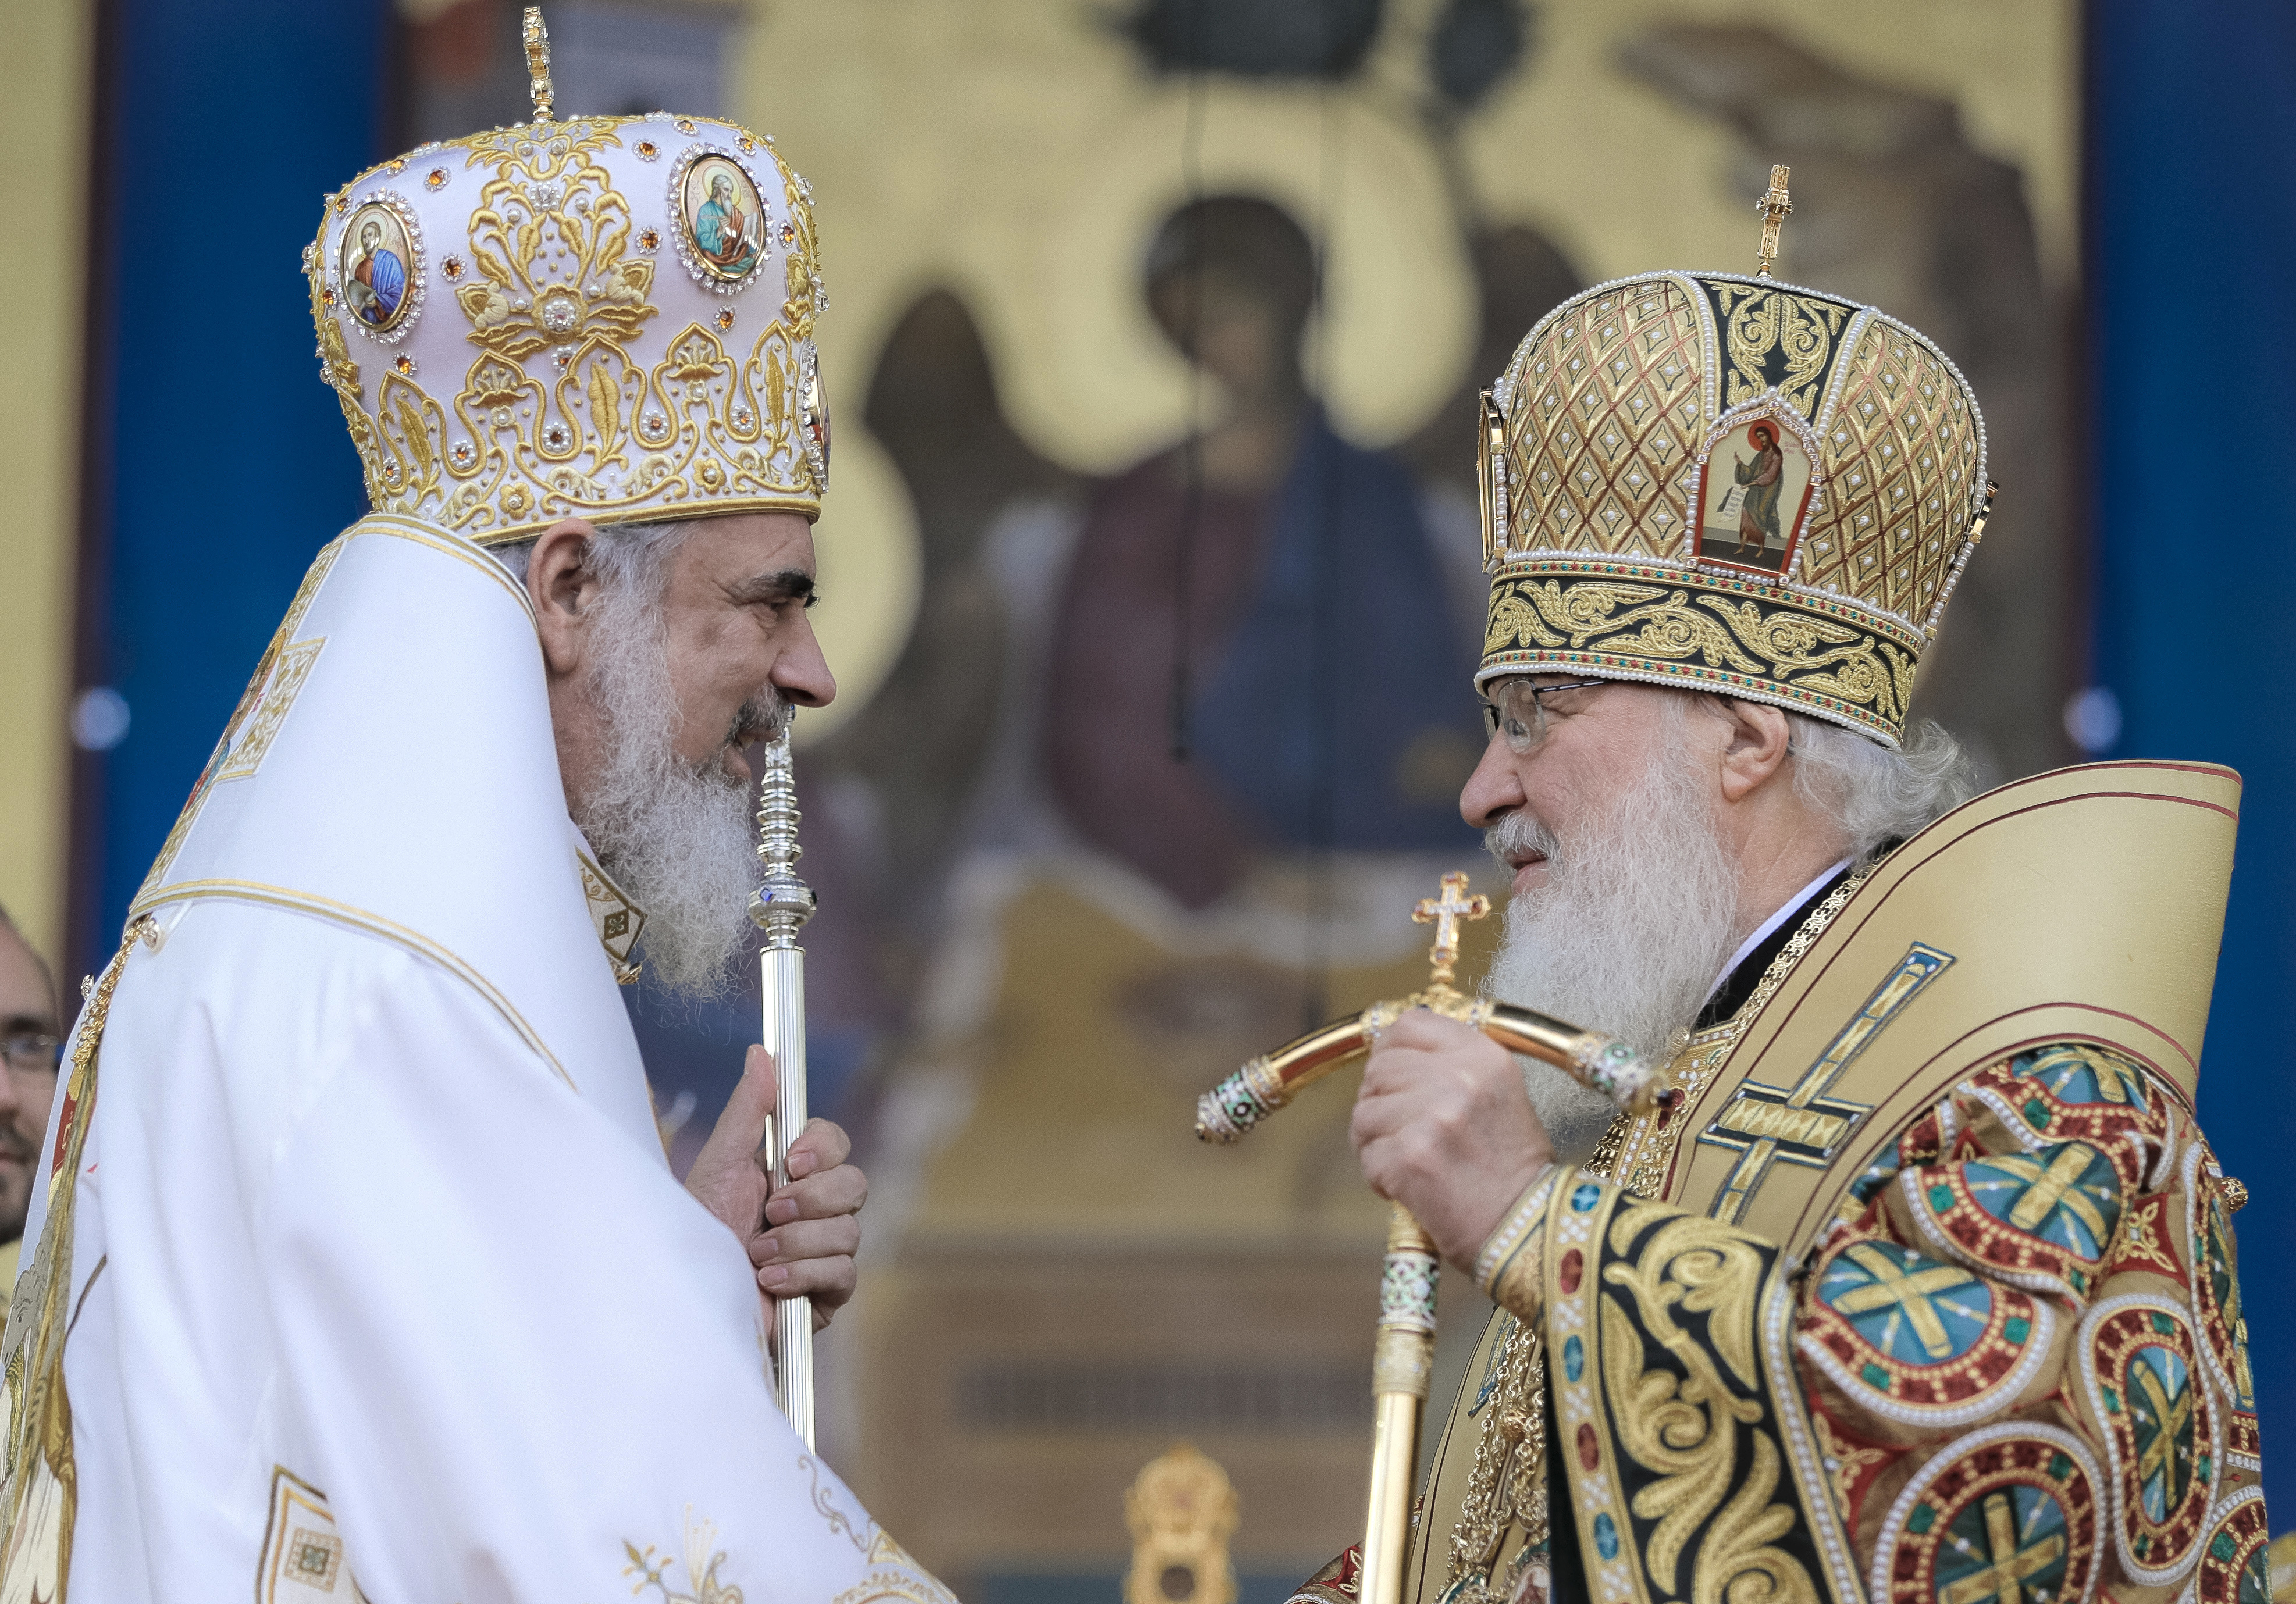 The head of the Russian Orthodox Church Patriarch Kirill Patriarch, right, shakes hands with Patriarch Daniel, the head of the Romanian Orthodox Church during a religious service in Bucharest, Romania, Friday, Oct. 27, 2017.  Russian Orthodox patriarch of Moscow Kirill is in Romania in the first visit by the head of the powerful Russian church since communism ended.(AP Photo/Vadim Ghirda)